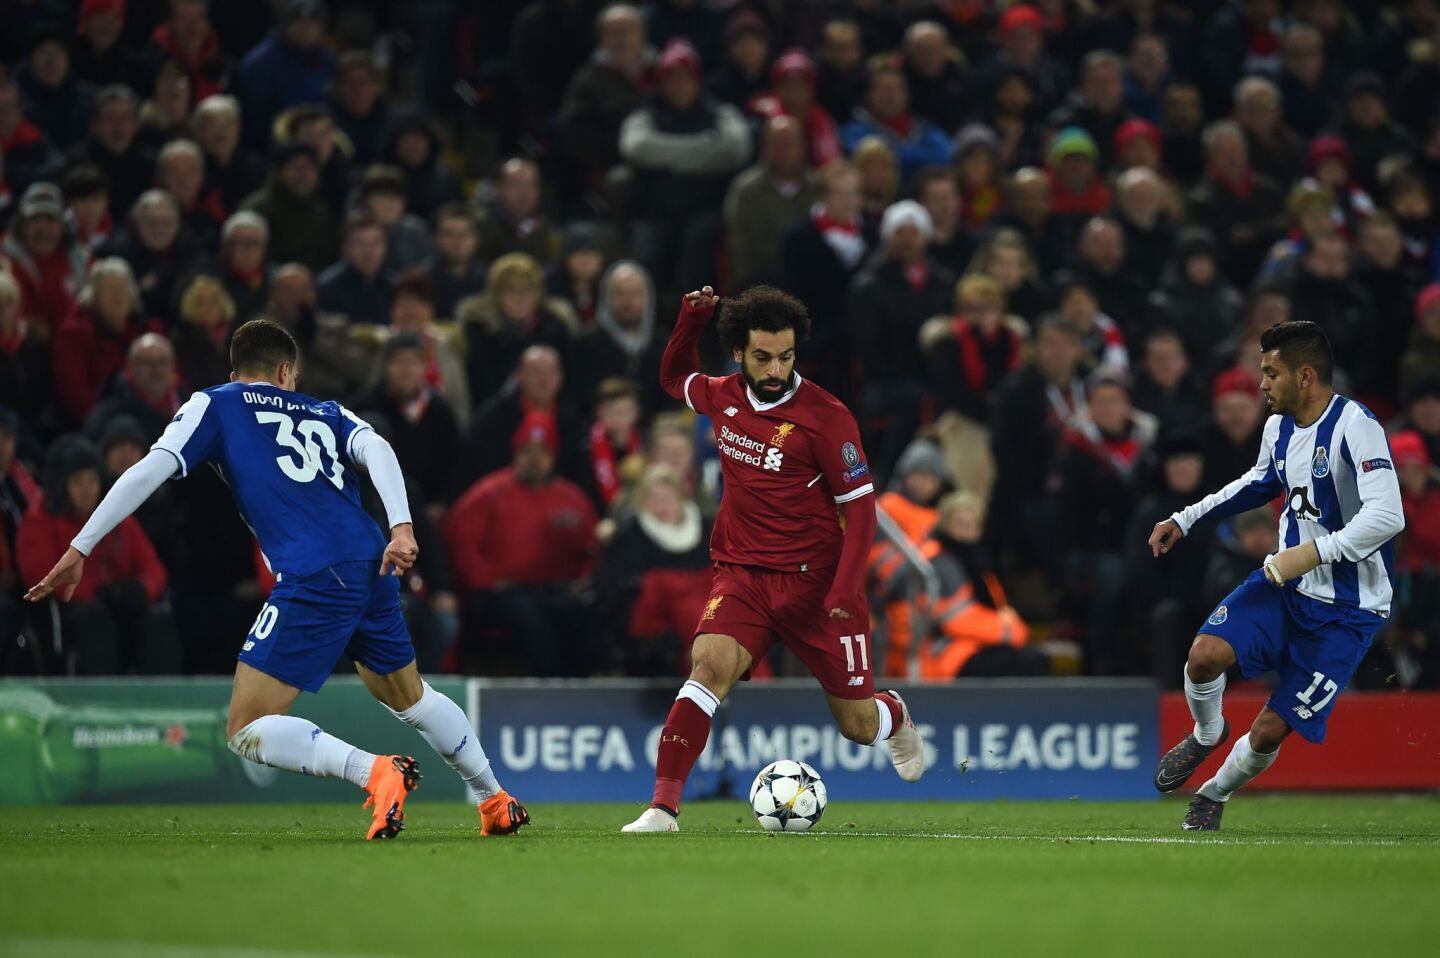 Liverpool's Egyptian midfielder Mohamed Salah (C) is marked by Porto's Portuguese defender Diogo Dalot (L) and Liverpool's Estonian defender Ragnar Klavan during the UEFA Champions League round of sixteen second leg football match between Liverpool and FC Porto at Anfield in Liverpool, north-west England on March 6, 2018. / AFP PHOTO / PAUL ELLISPAUL ELLIS/AFP/Getty Images ** OUTS - ELSENT, FPG, CM - OUTS * NM, PH, VA if sourced by CT, LA or MoD **